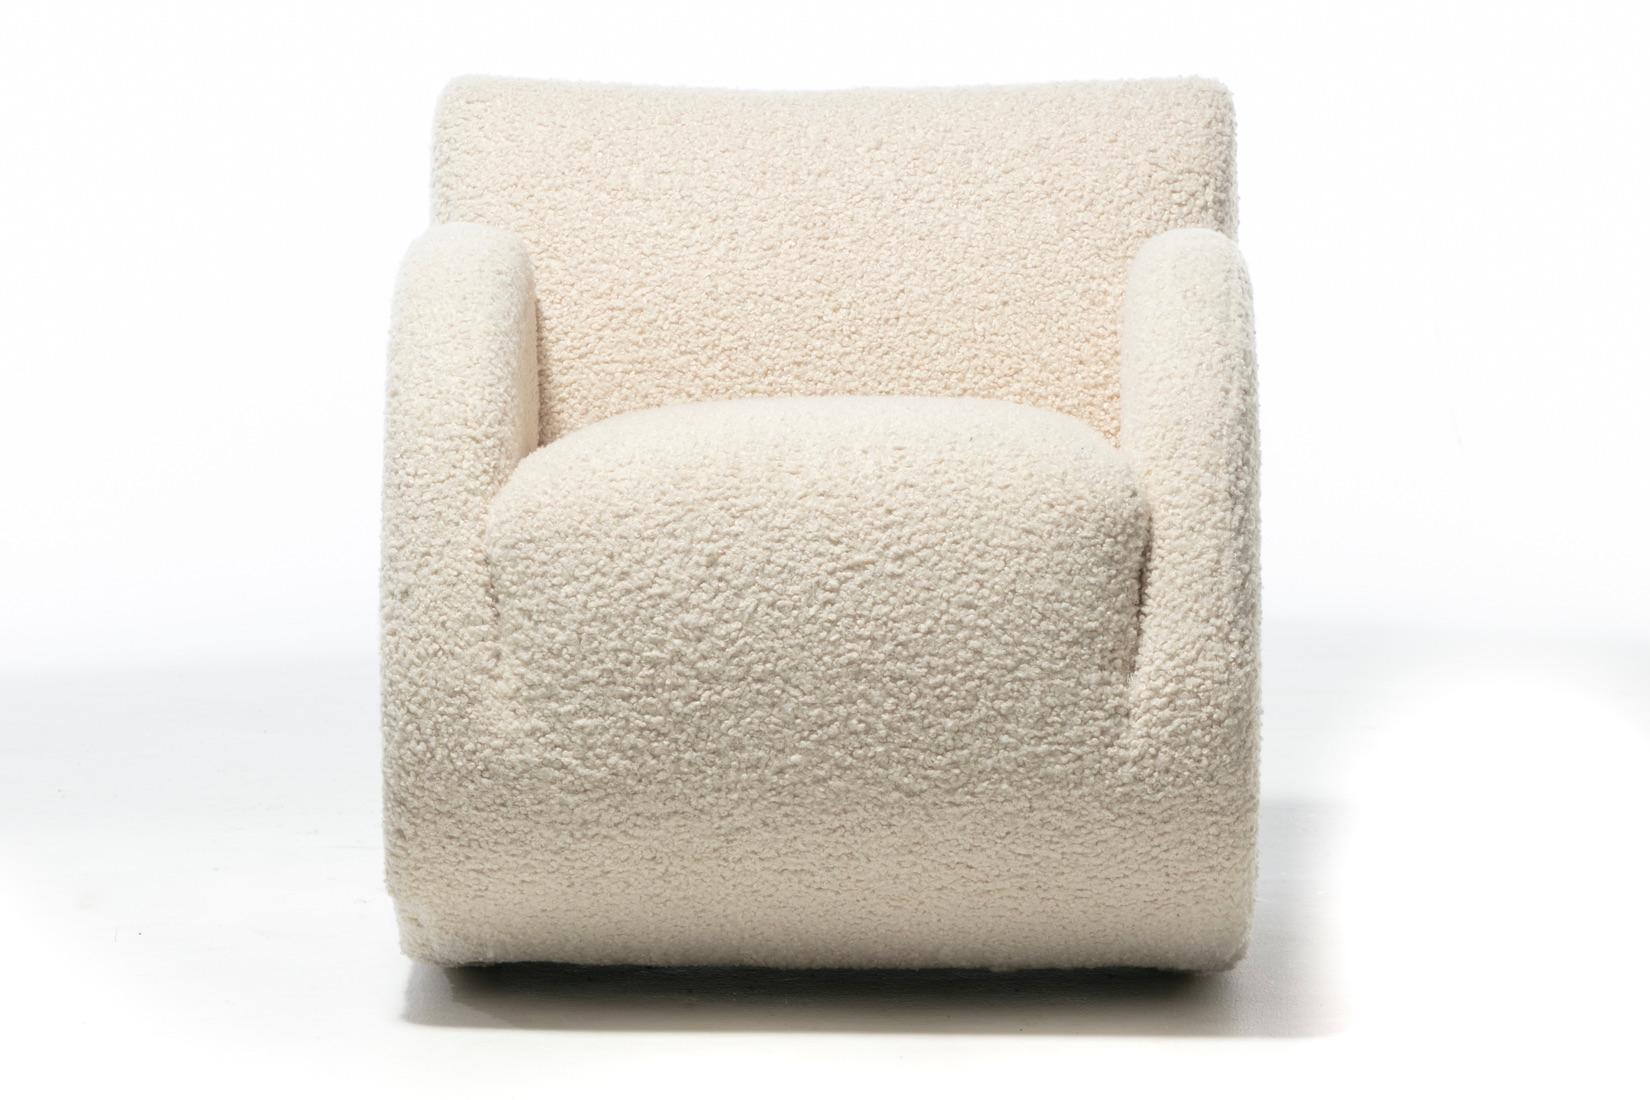 Contemporary Pair of Vladimir Kagan Rockstar Rocker Lounge Chairs in Ivory Bouclé c. 1990 For Sale